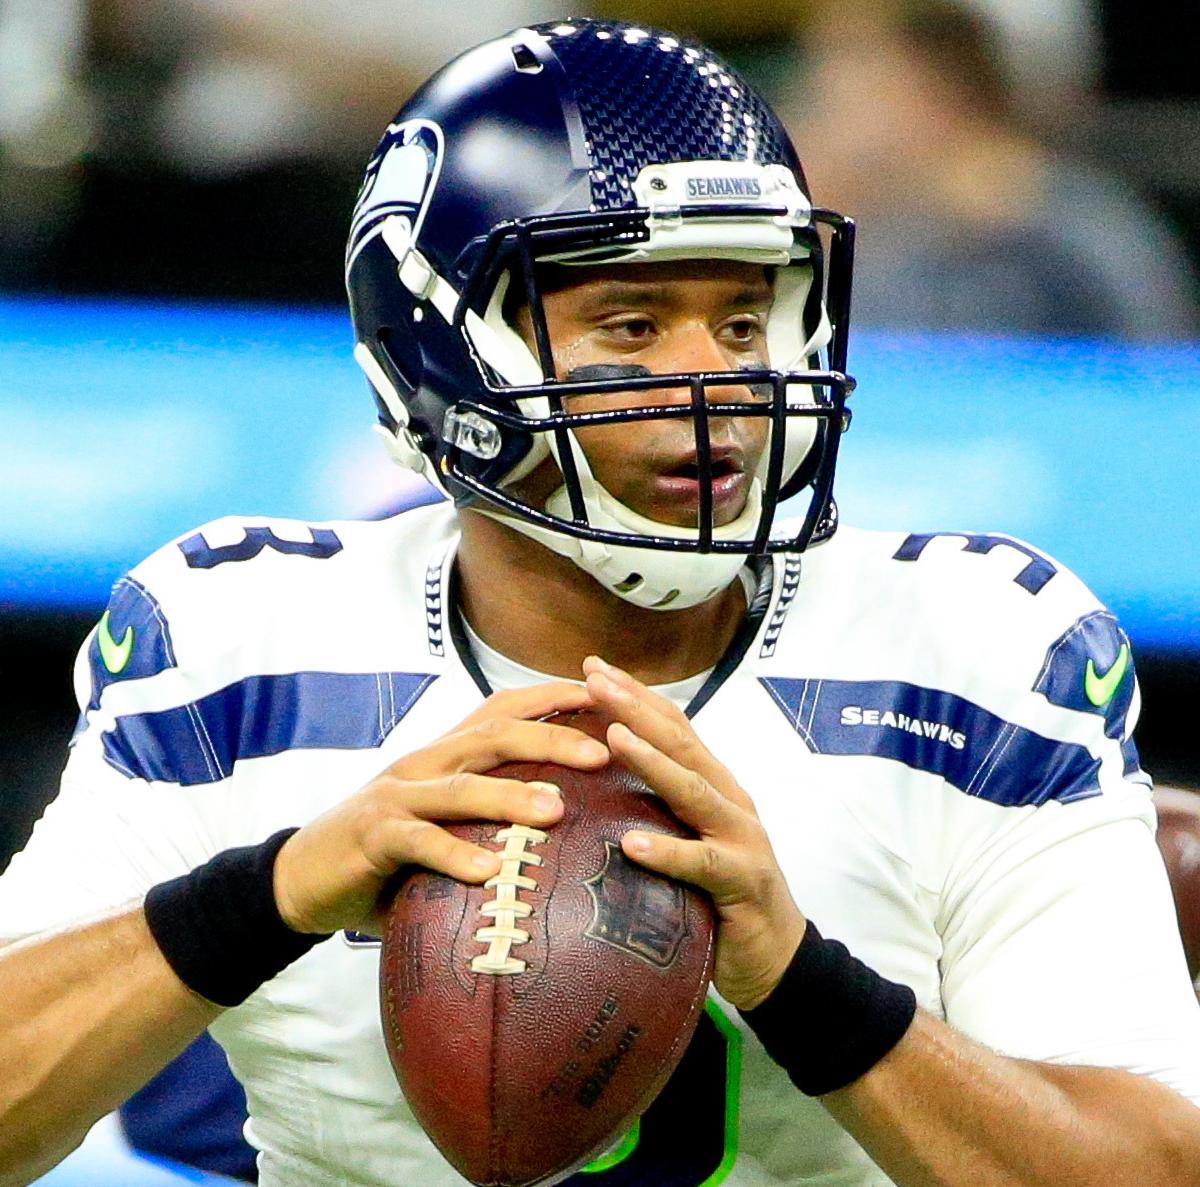 Rangers pick up QB Russell Wilson in Rule 5 draft